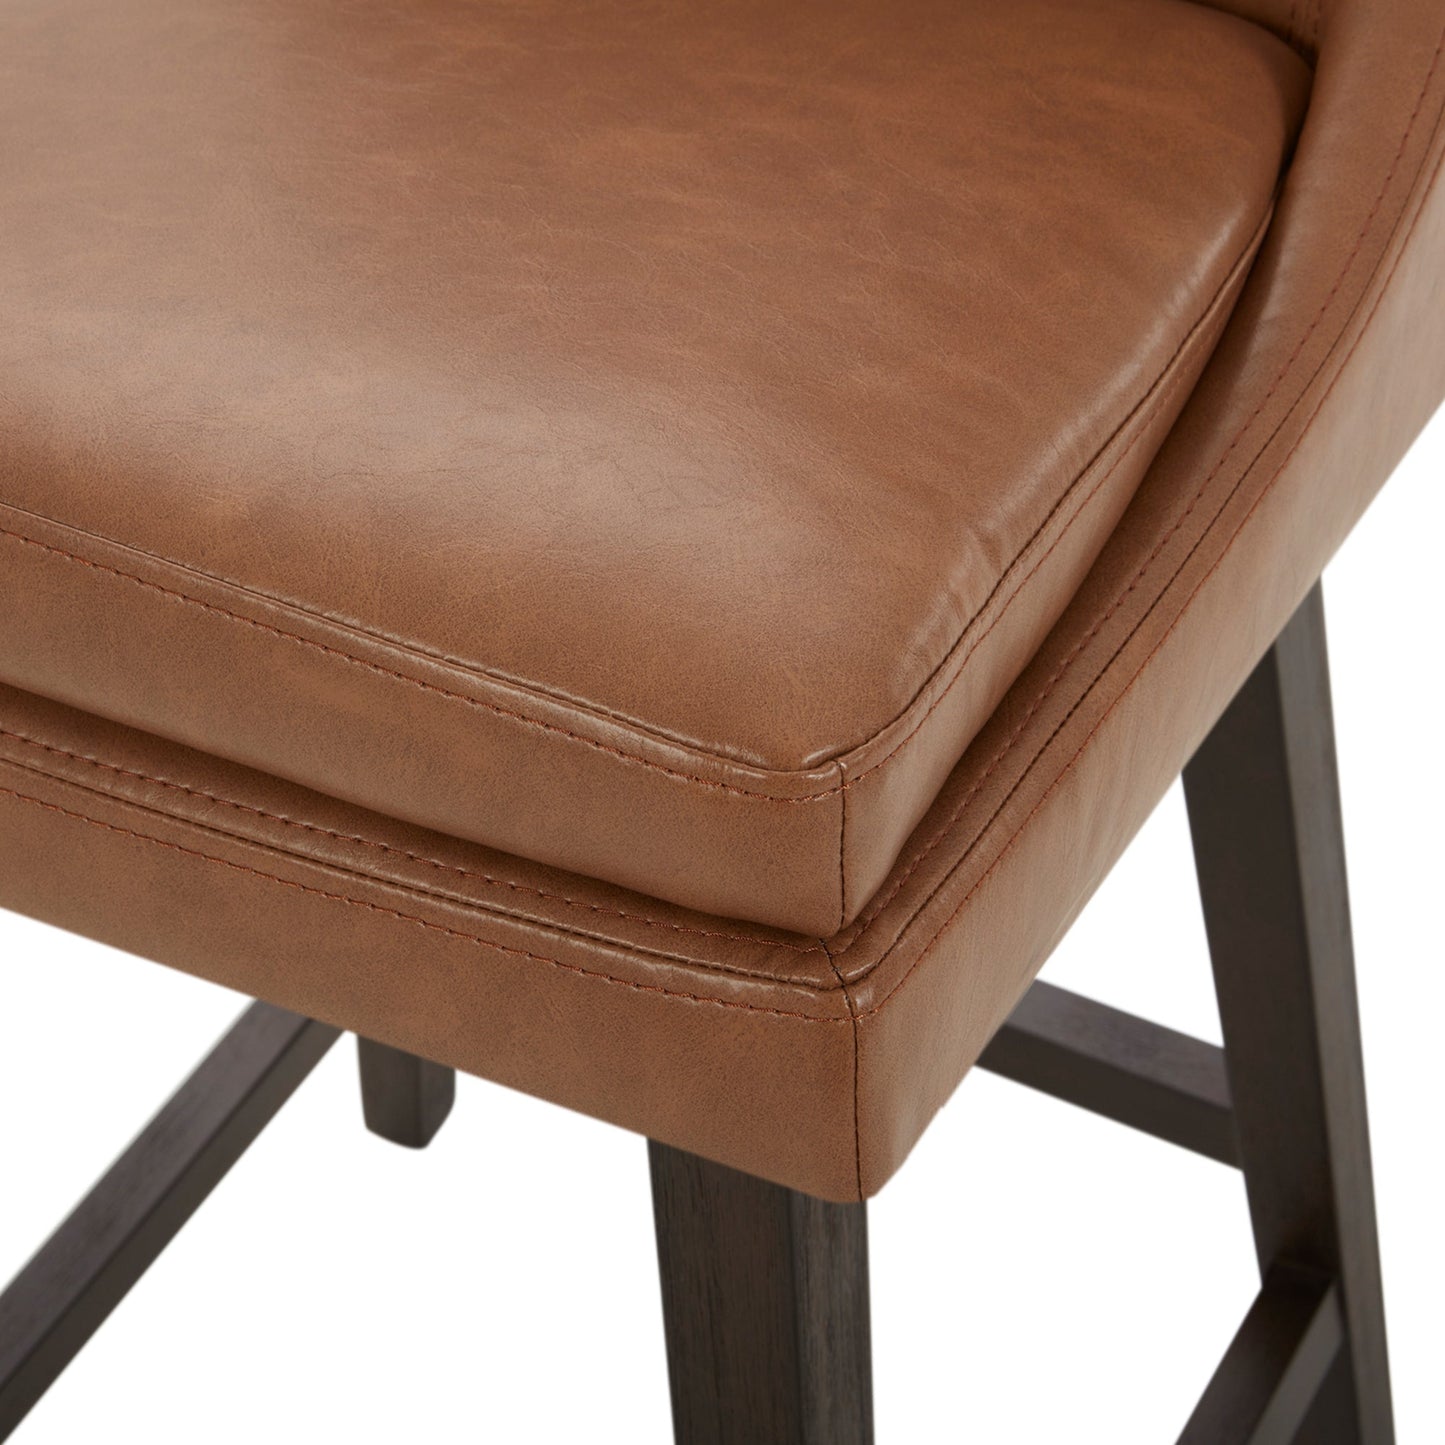 CHITA LIVING-Lissa Swivel Counter Stool 26.8''-Counter Stools-Faux Leather-Saddle Brown-